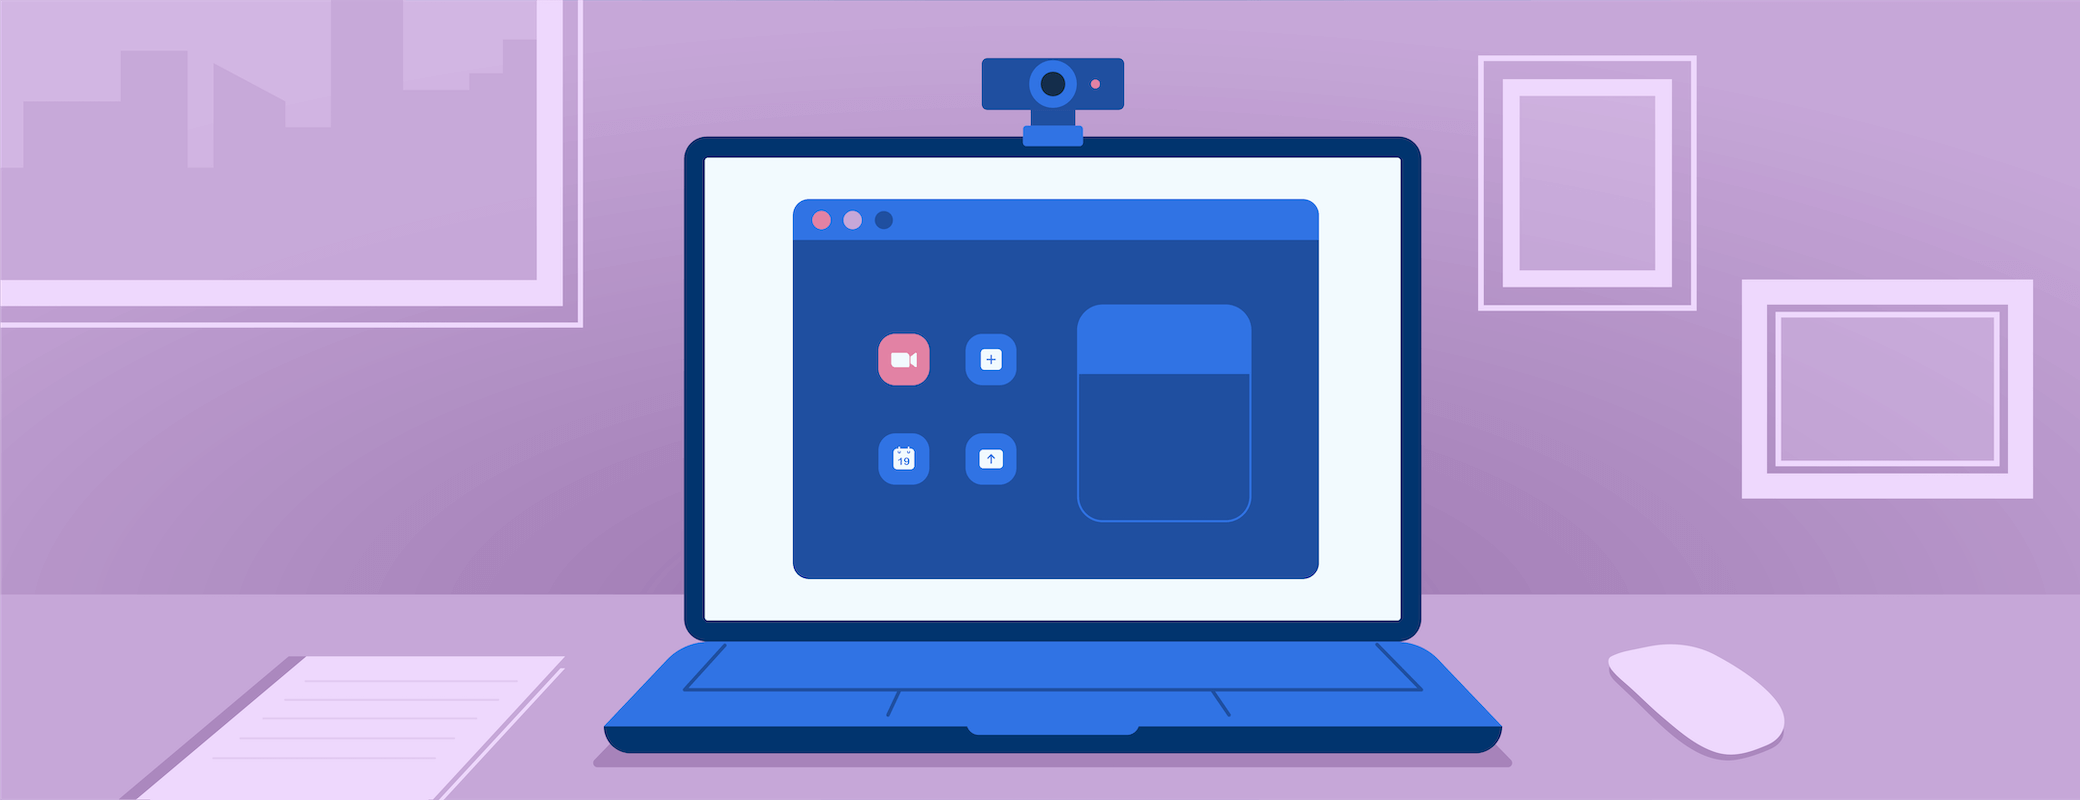 Webcam security in the age of Zoom